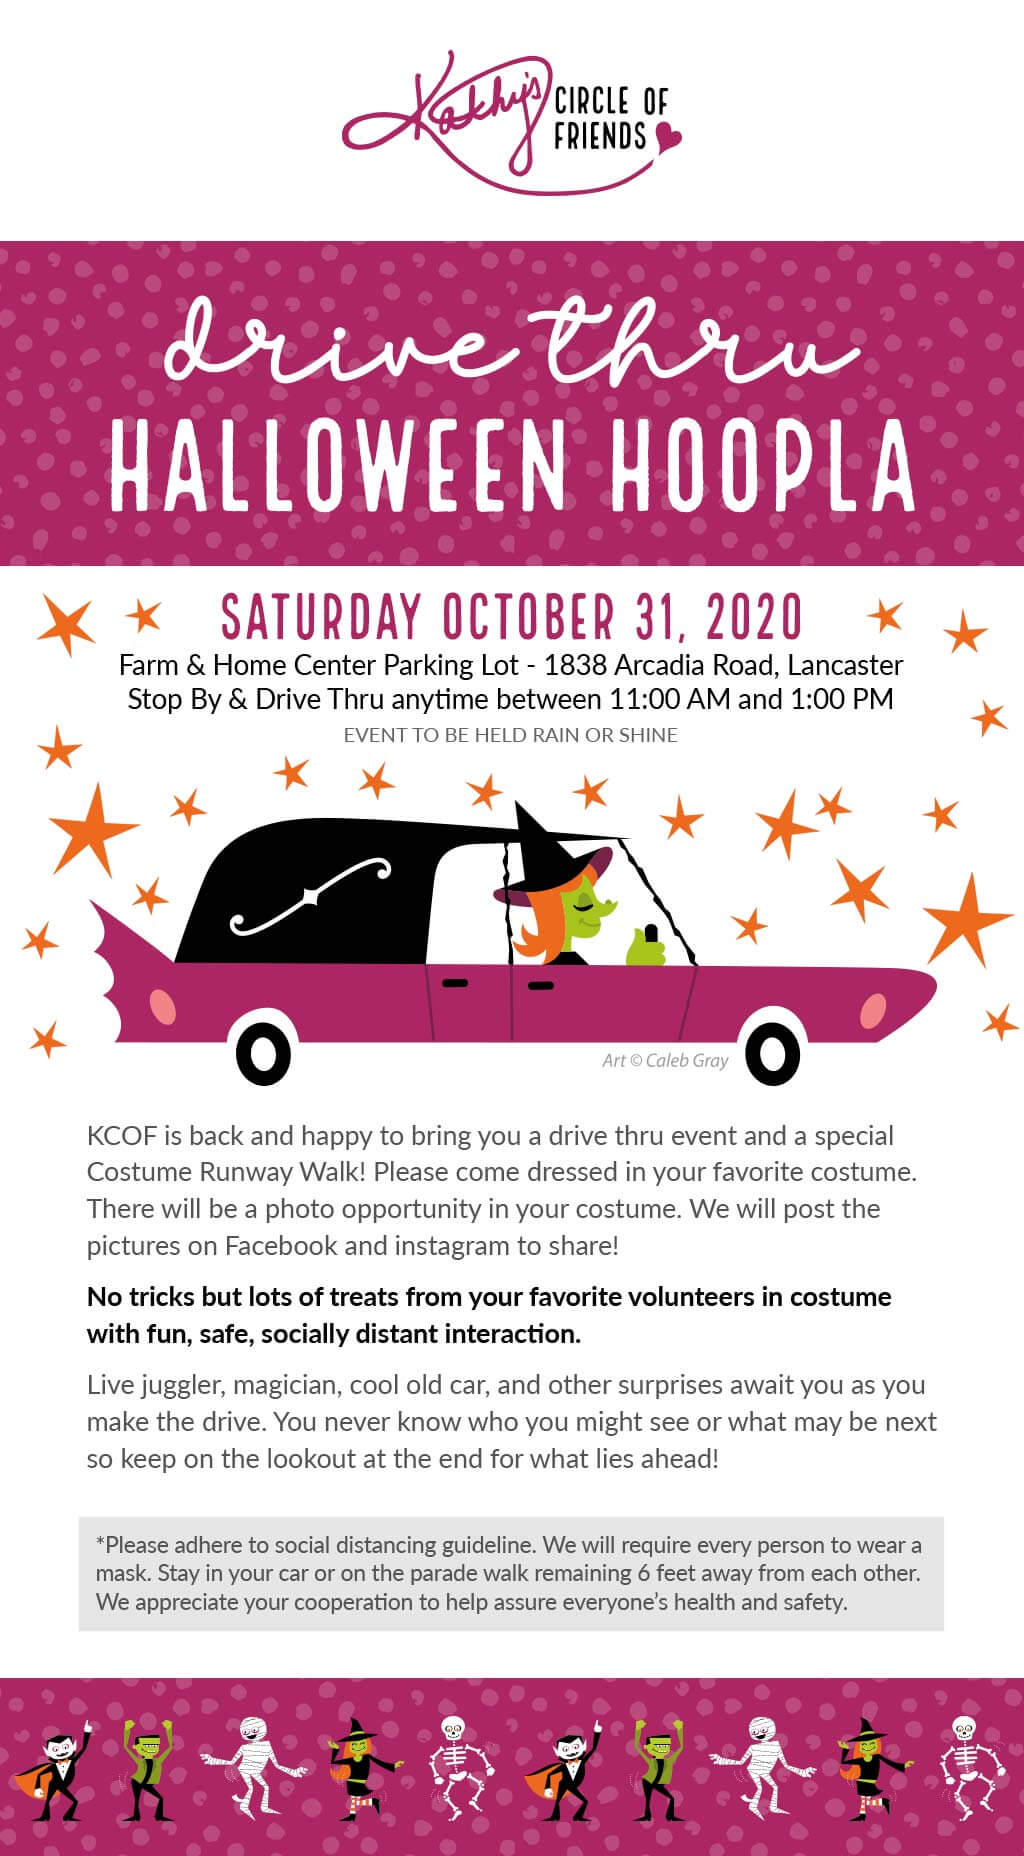 Kathy's Circle of Friends DRIVE THRU HALLOWEEN HOOPLA When: Saturday October 31, 2020 Where: Farm & Home Center Parking Lot - 1838 Arcadia Road, Lancaster Times: Stop By & Drive Thru anytime between 11:00am and 1:00pm EVENT TO BE HELD RAIN OR SHINE KCOF is back and happy to bring you a drive thru event and a special Costume Runway Walk! Please come dressed in your favorite costume. There will be a photo opportunity in your costume. We will post the pictures on Facebook and instagram to share! No tricks but lots of treats from your favorite volunteers in costume with fun, safe, socially distant interaction. Live juggler, magician, cool old car, and other surprises await you as you make the drive. You never know who you might see or what may be next so keep on the lookout at the end for what lies ahead! *Please adhere to social distancing guideline. We will require every person to wear a mask. Stay in your car or on the parade walk remaining 6 feet away from each other. We appreciate your cooperation to help assure everyone's health and safety.